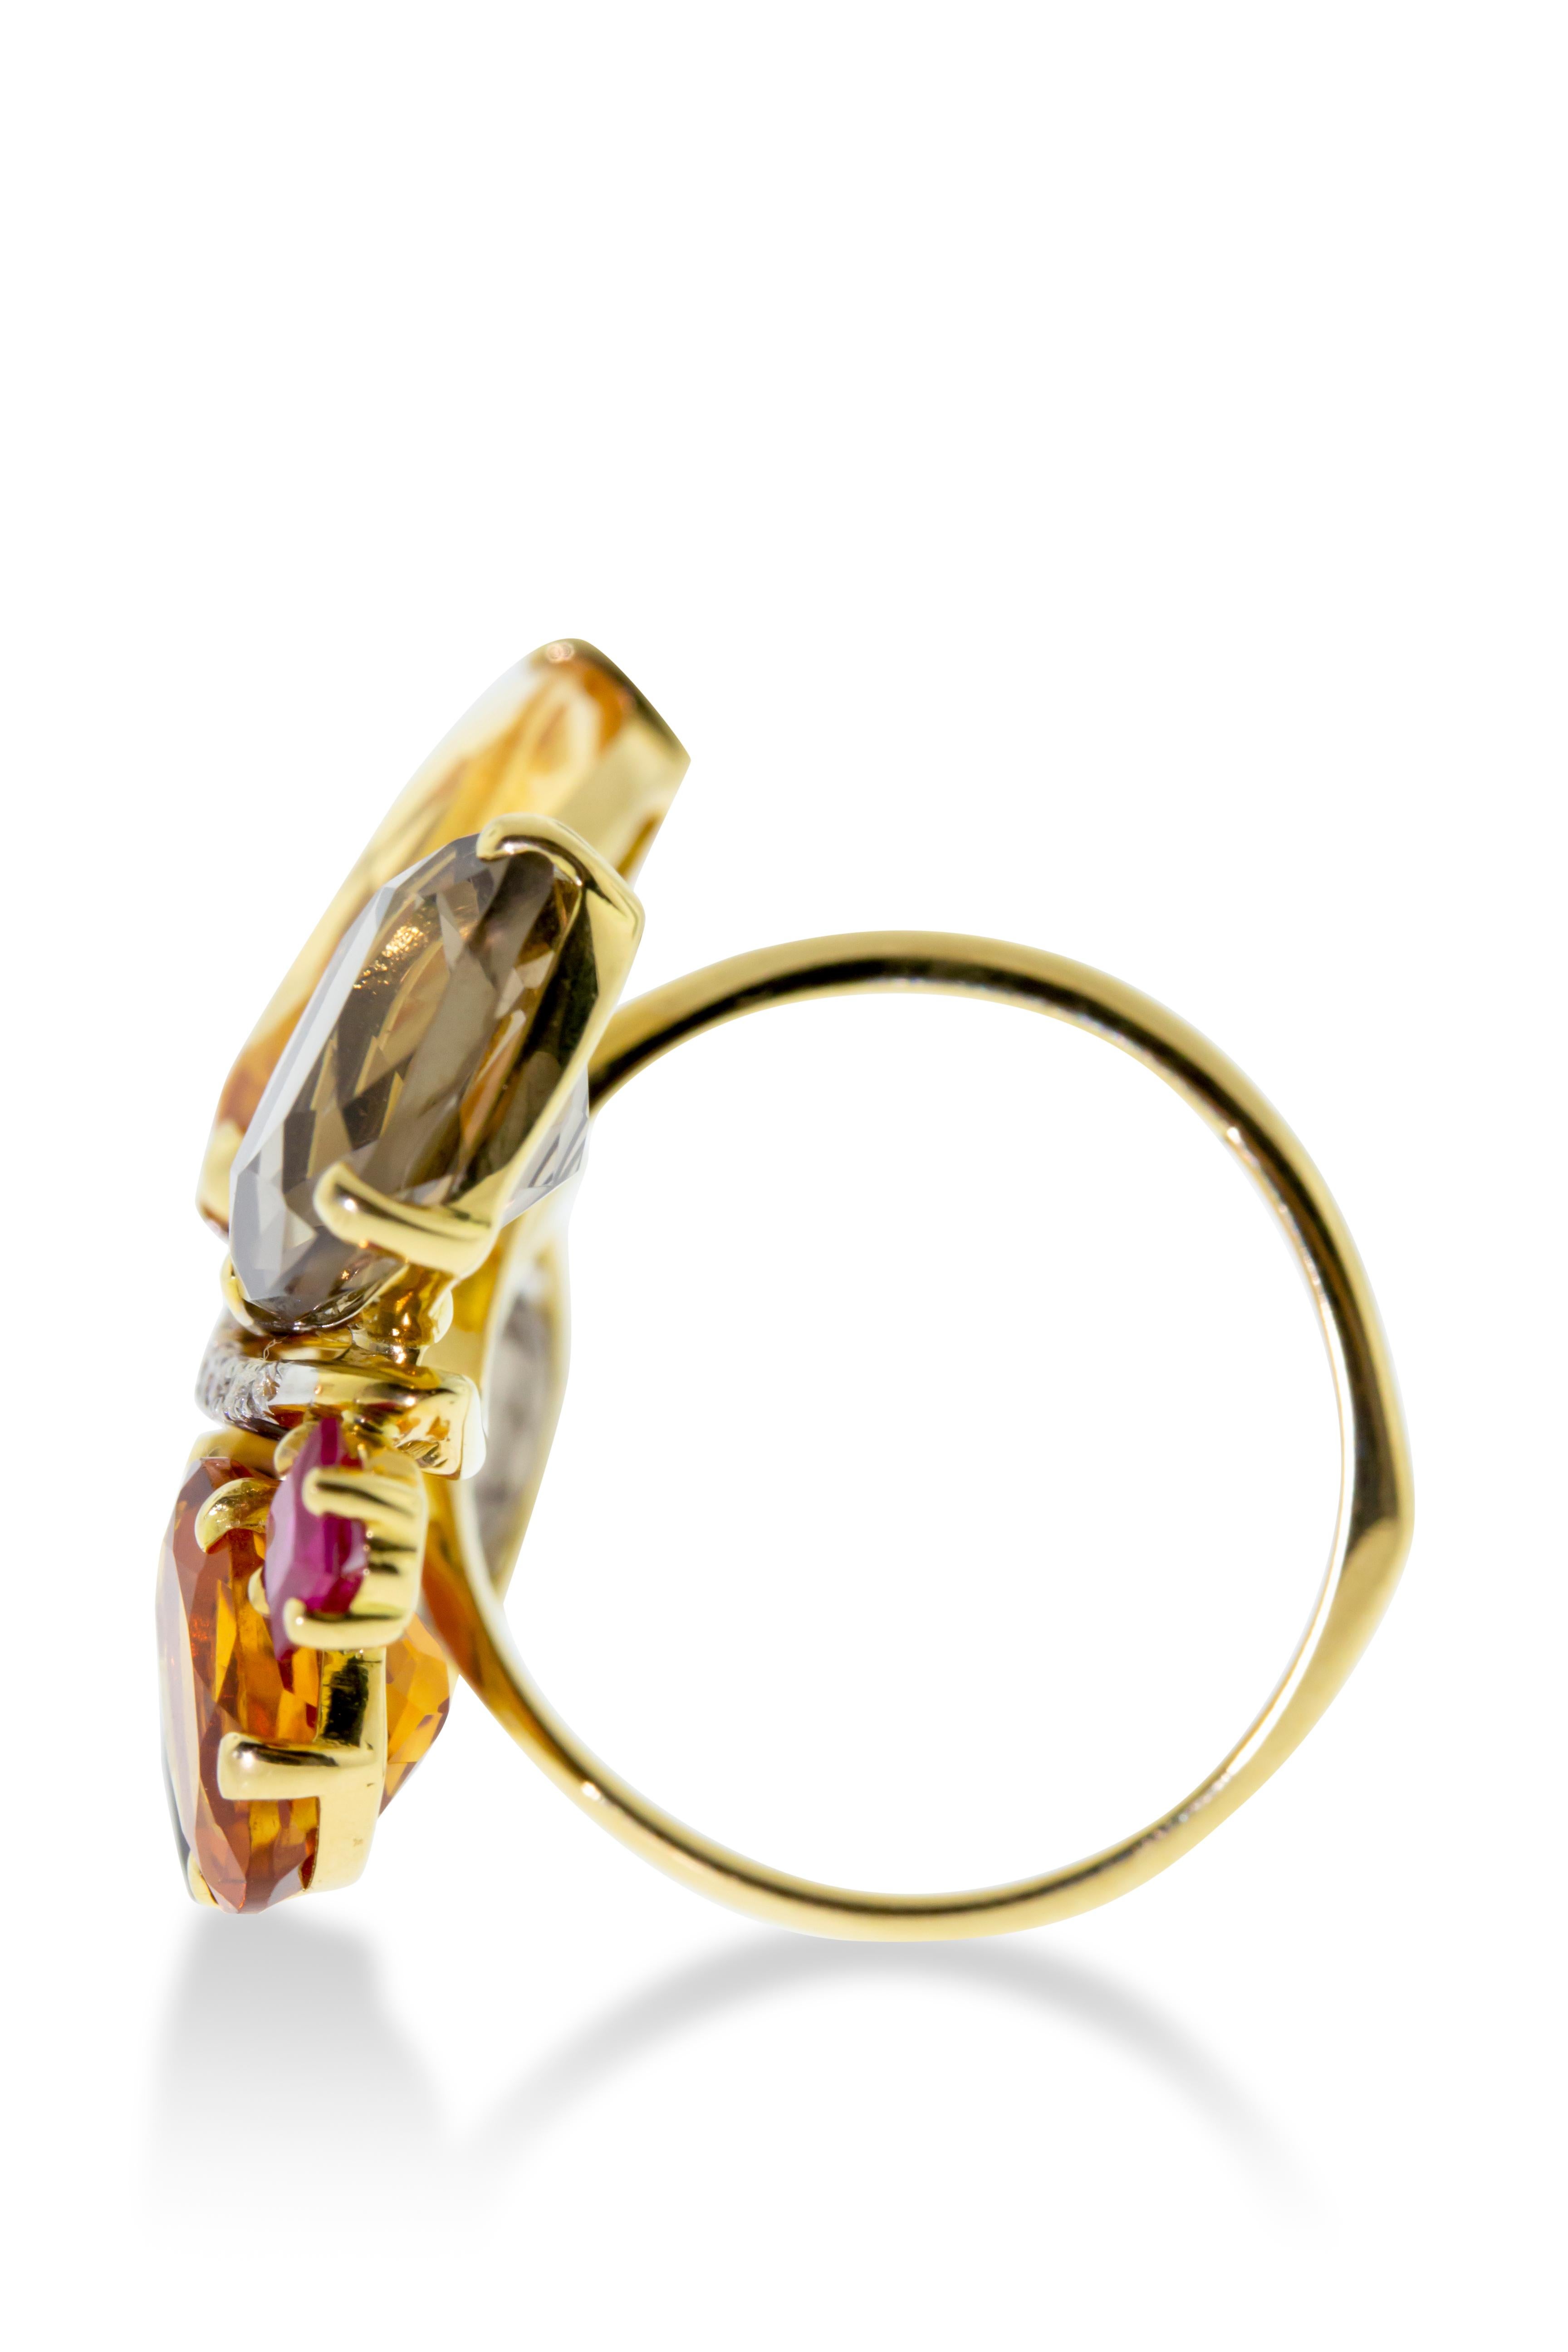 18K yellow gold Ponte Vecchio Gioielli cocktail ring featuring 16.7 carats quartz, 0.41 carats of rubies, and a 0.05 carat round cut diamond. 8 grams of high polish 18K yellow gold. Made in Italy. Size 6.5.

Viewings available in our NYC showroom by